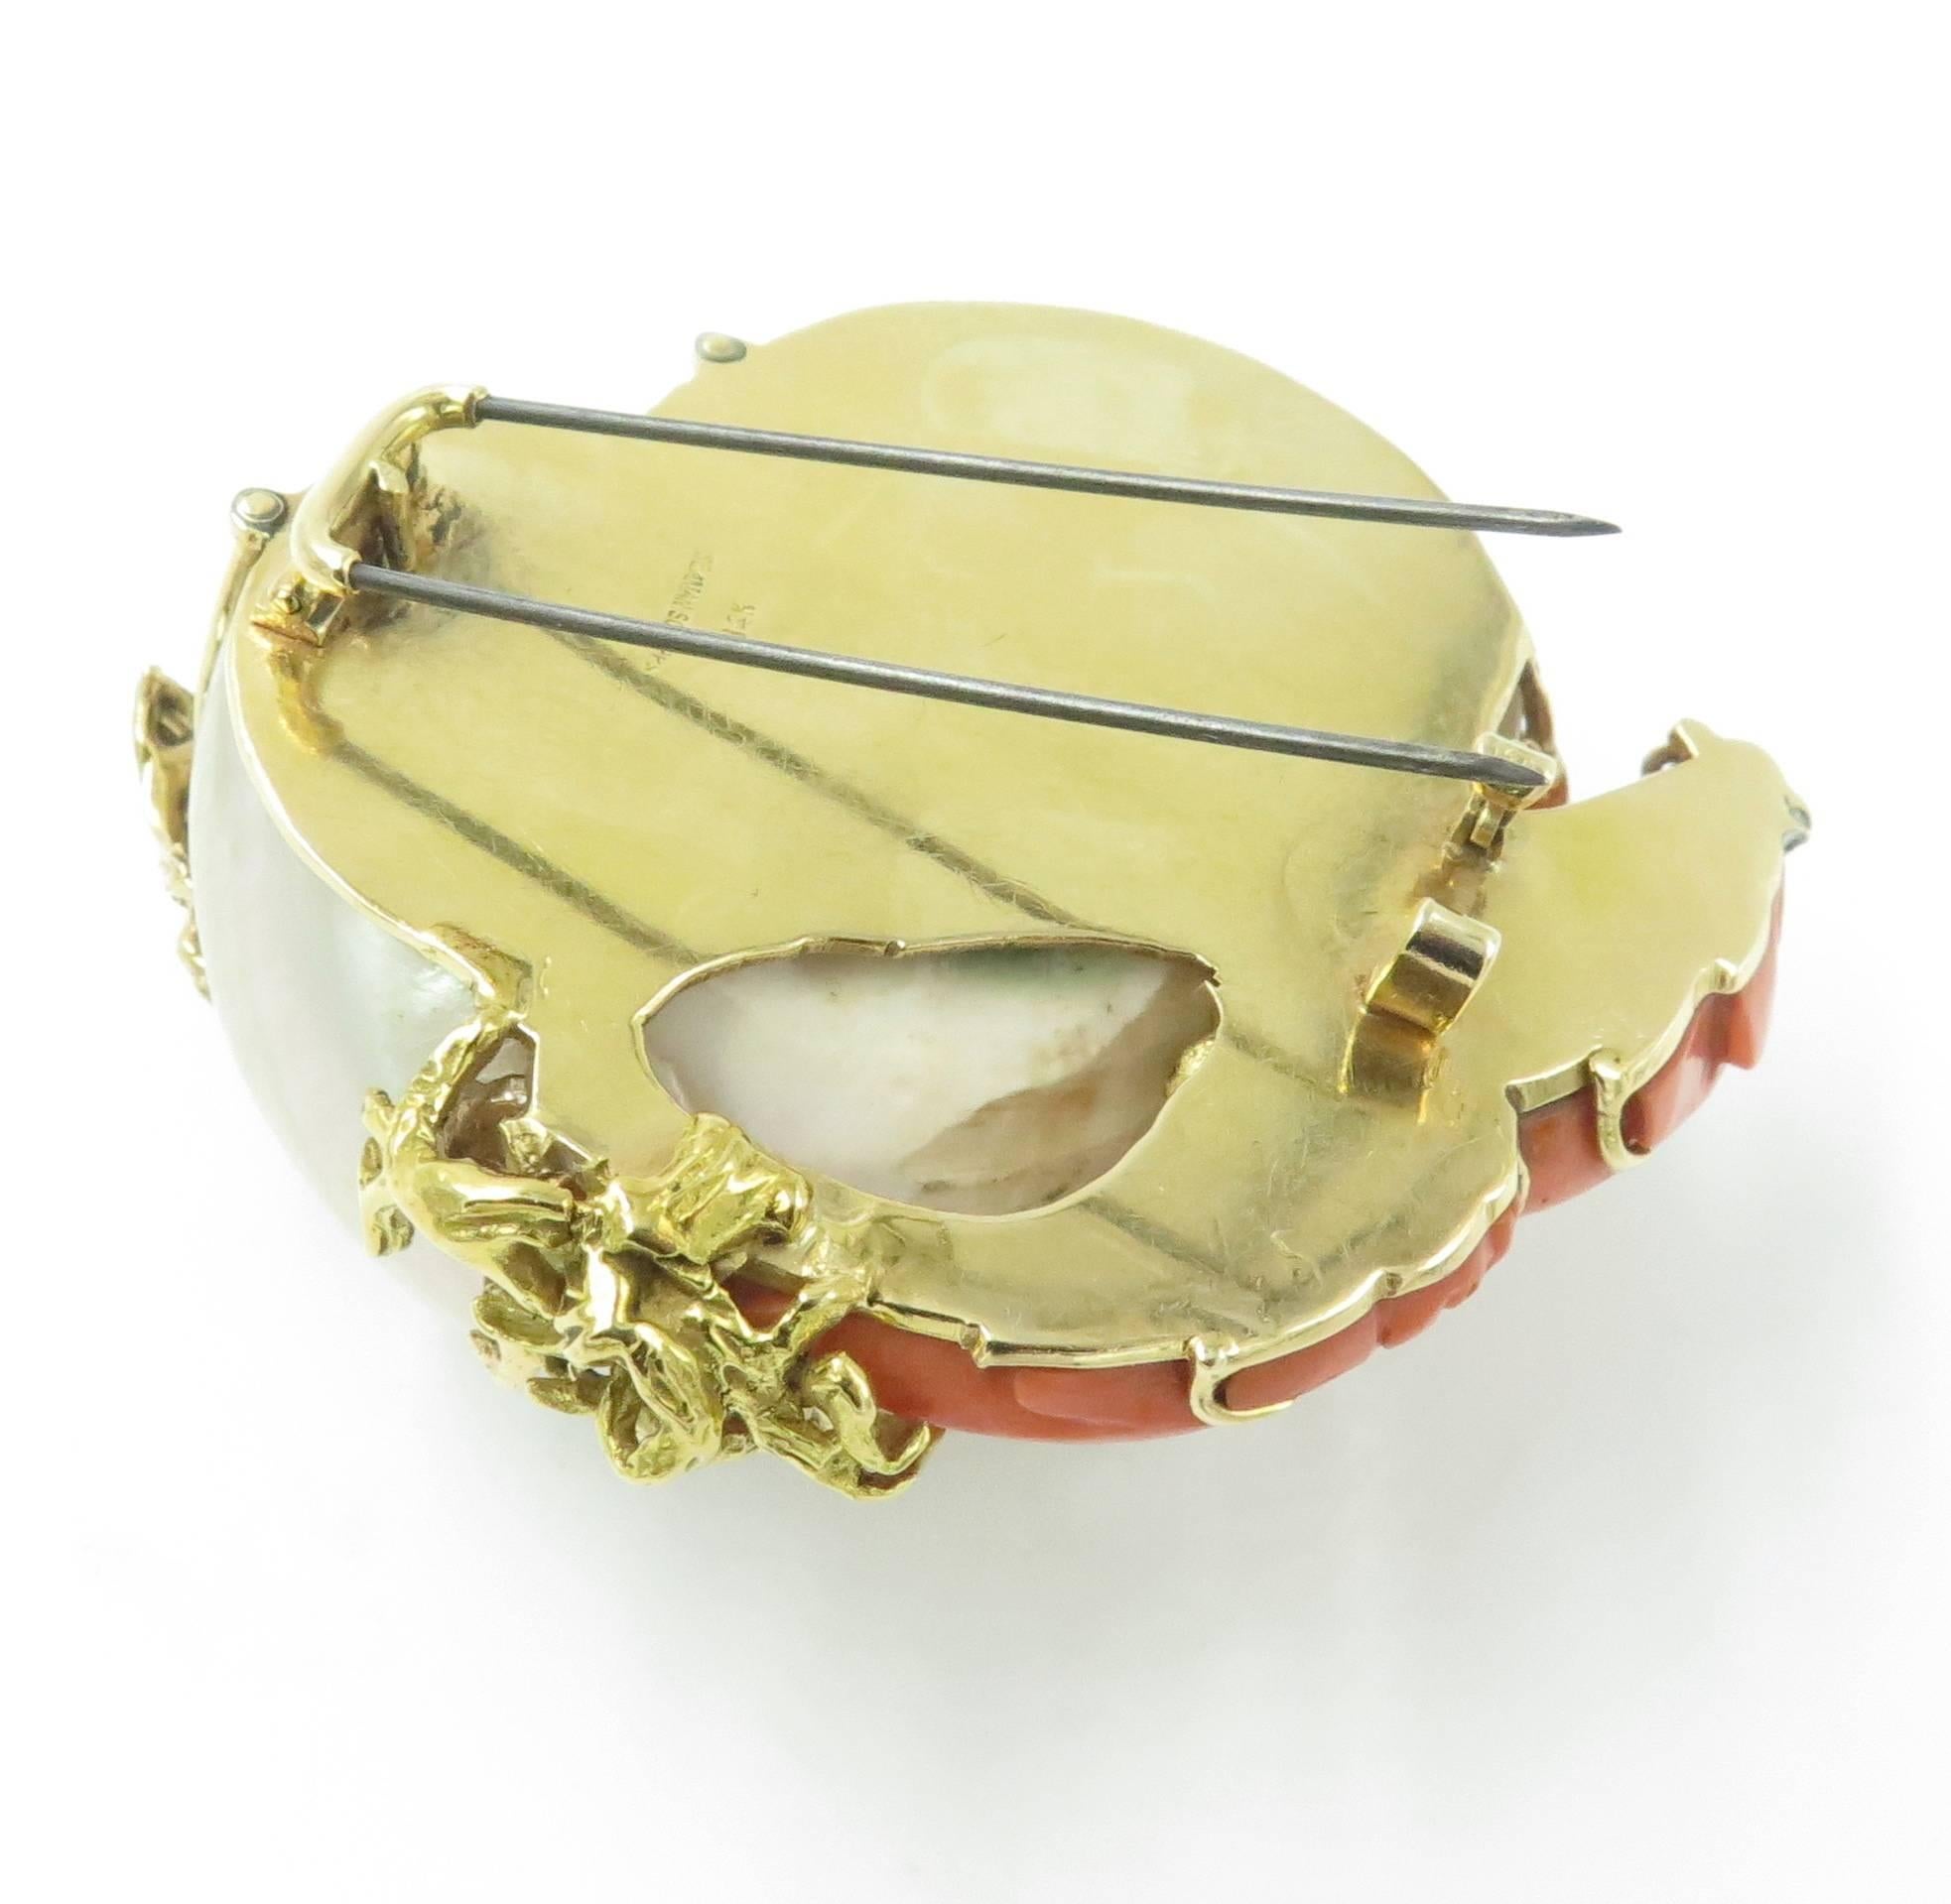 SEAMAN SCHEPPS Coral, Shell and Gold Brooch. 3